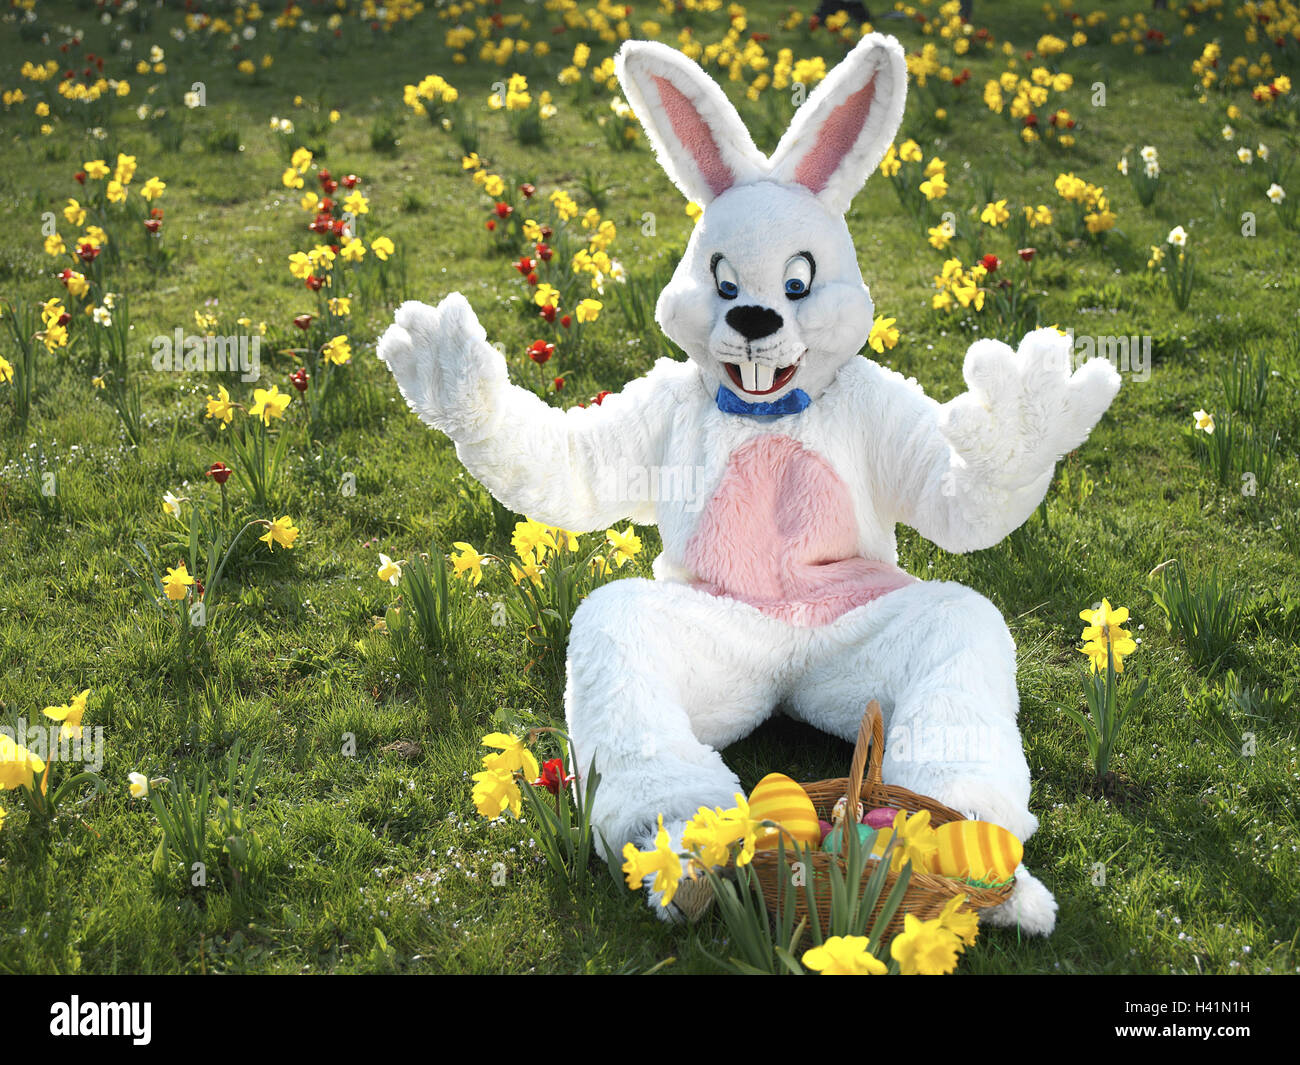 Sits meadow, Easter bunny, waves,  Easter eggs  Series, flower meadow, flowers, daffodils, jonquils, Easter, Easter, child beliefs, disguise, disguises, outfit, hare outfit, hare, humor, fun, merrily, kindly, cheerfully, joy, Easter nest, Easter basket, hides, seeks, finds, season, spring, spring, outside, whole bodies Stock Photo